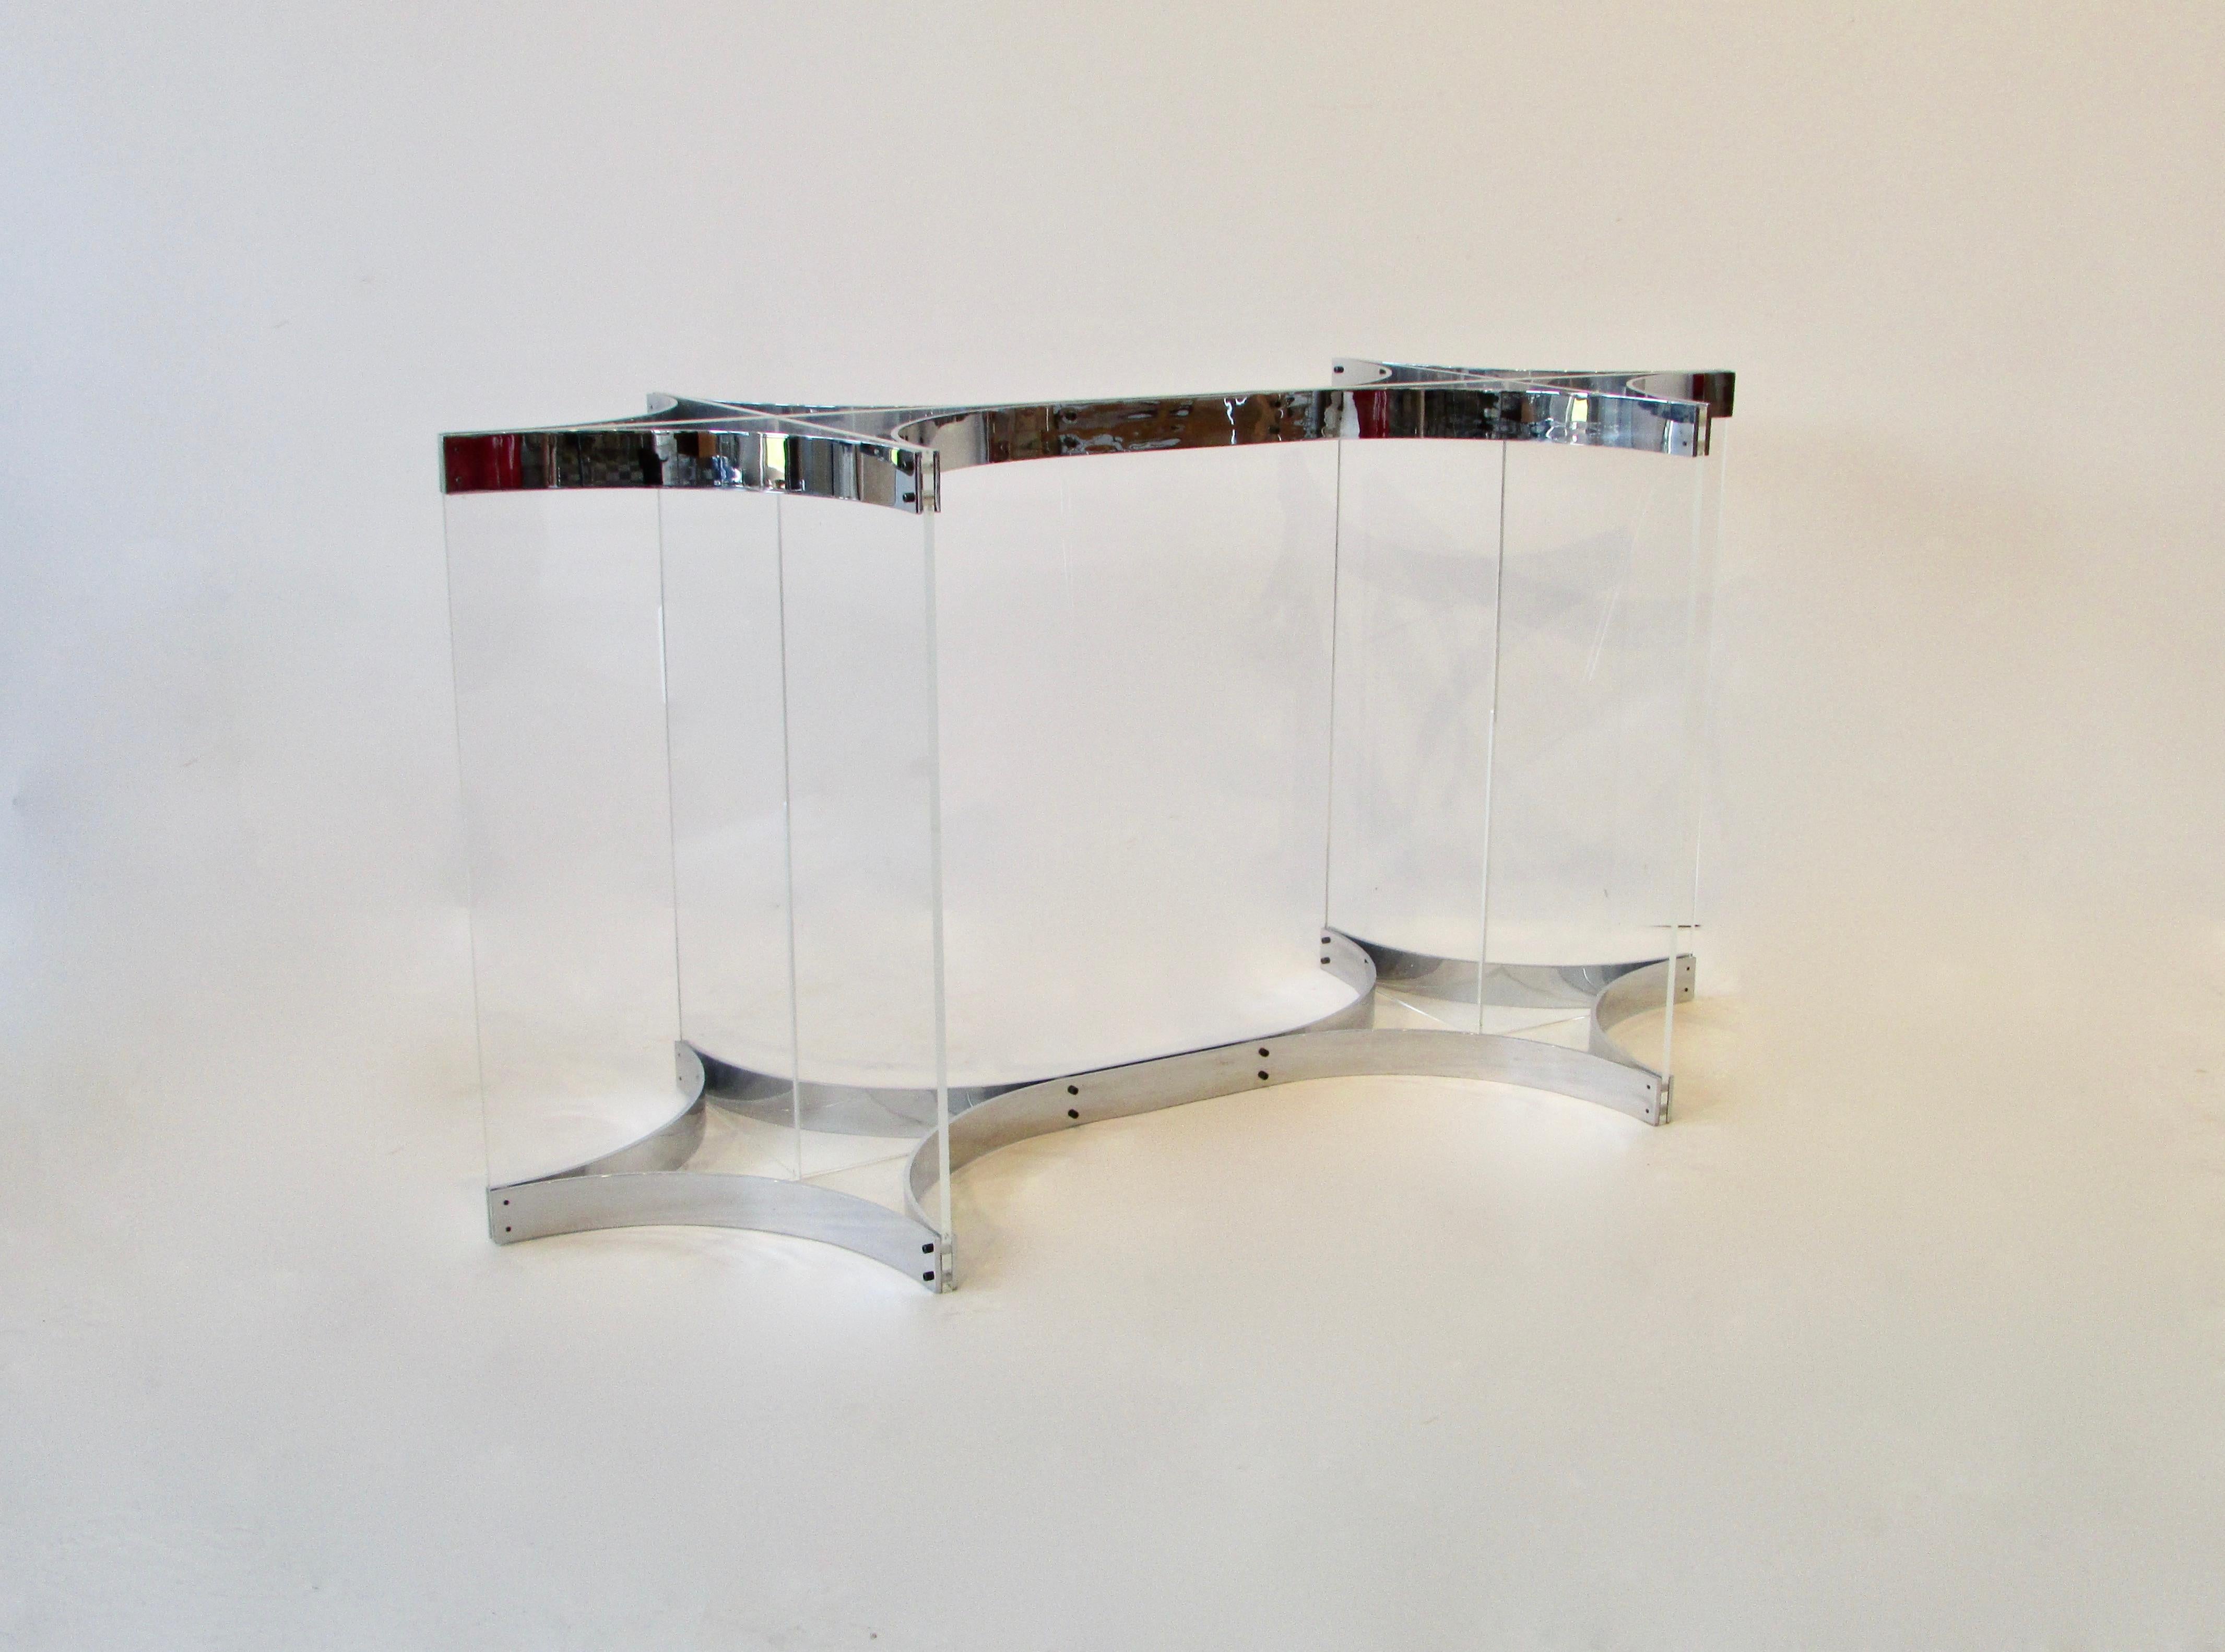 Alessandro Albrizzi dining table base. 3/8 thick sheets of Lucite joined with polished chrome steel bands at top and bottom. Very clean chrome bands and Acrylic panels. Base is ready for your choice of table top material and size.